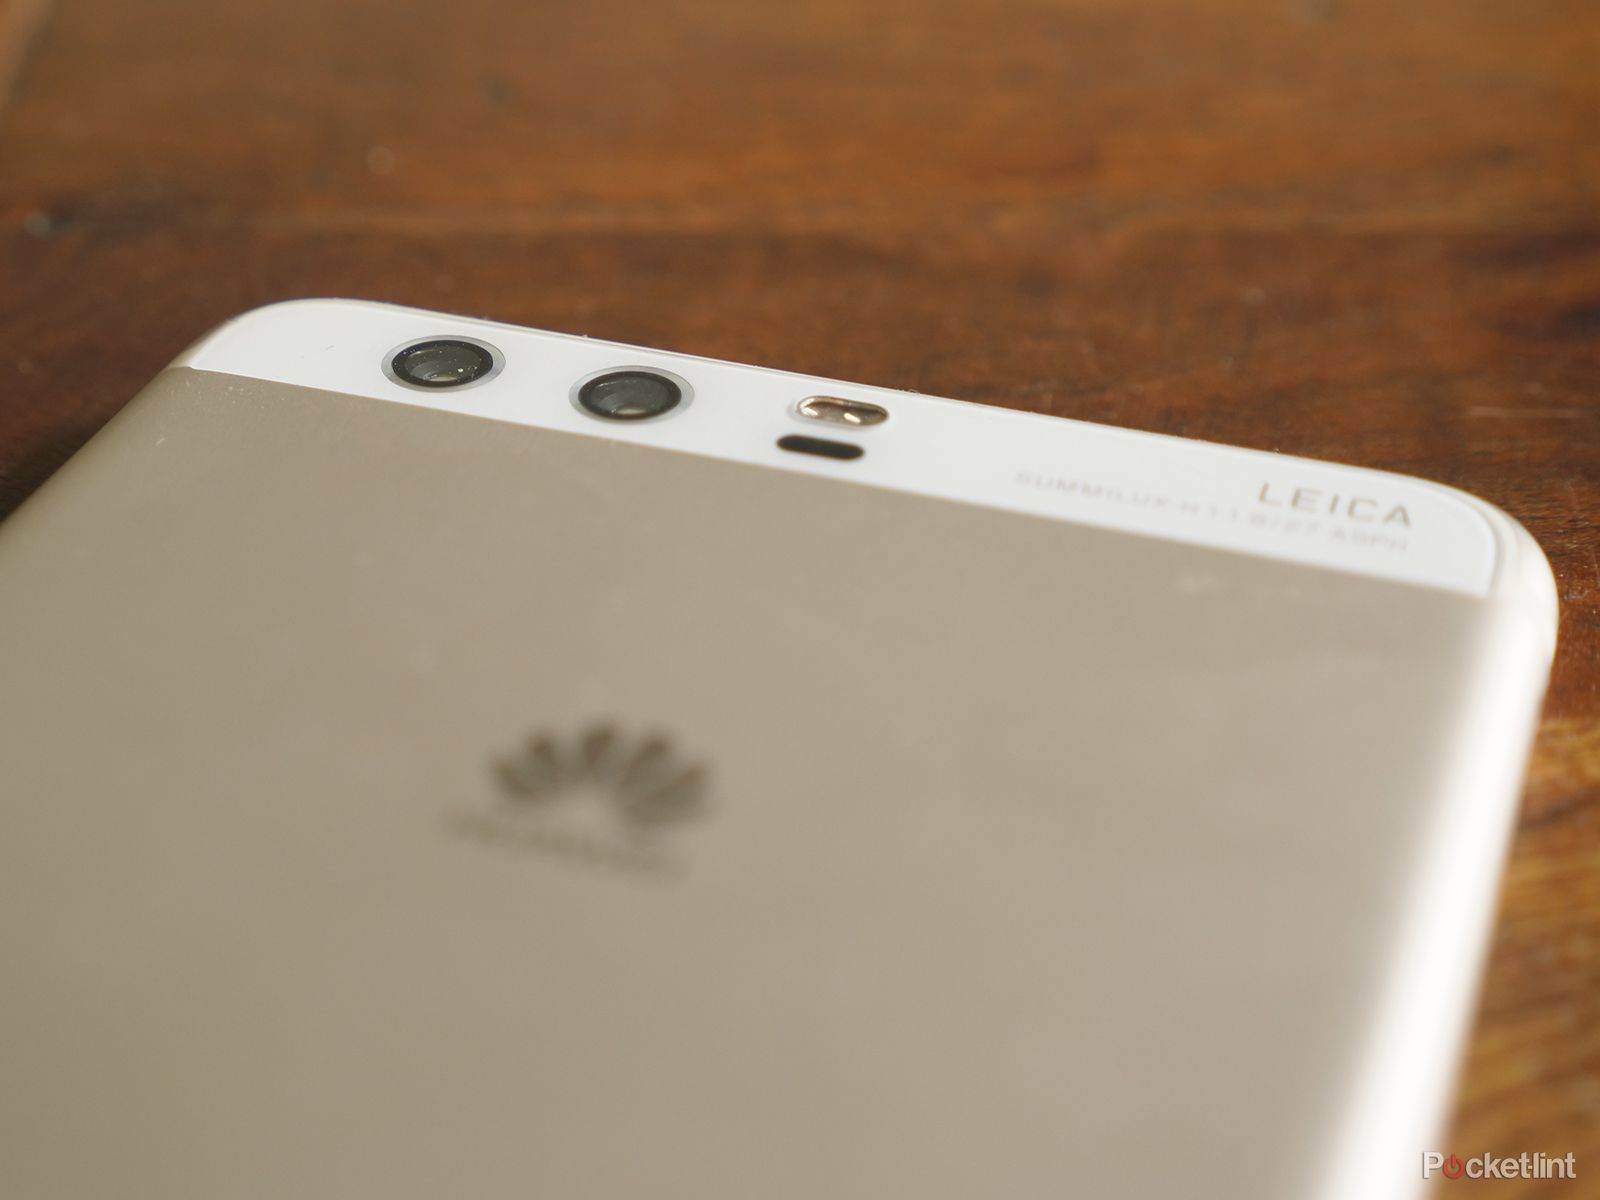 Huawei to hold event on 27 March likely for P20 phone unveiling image 1